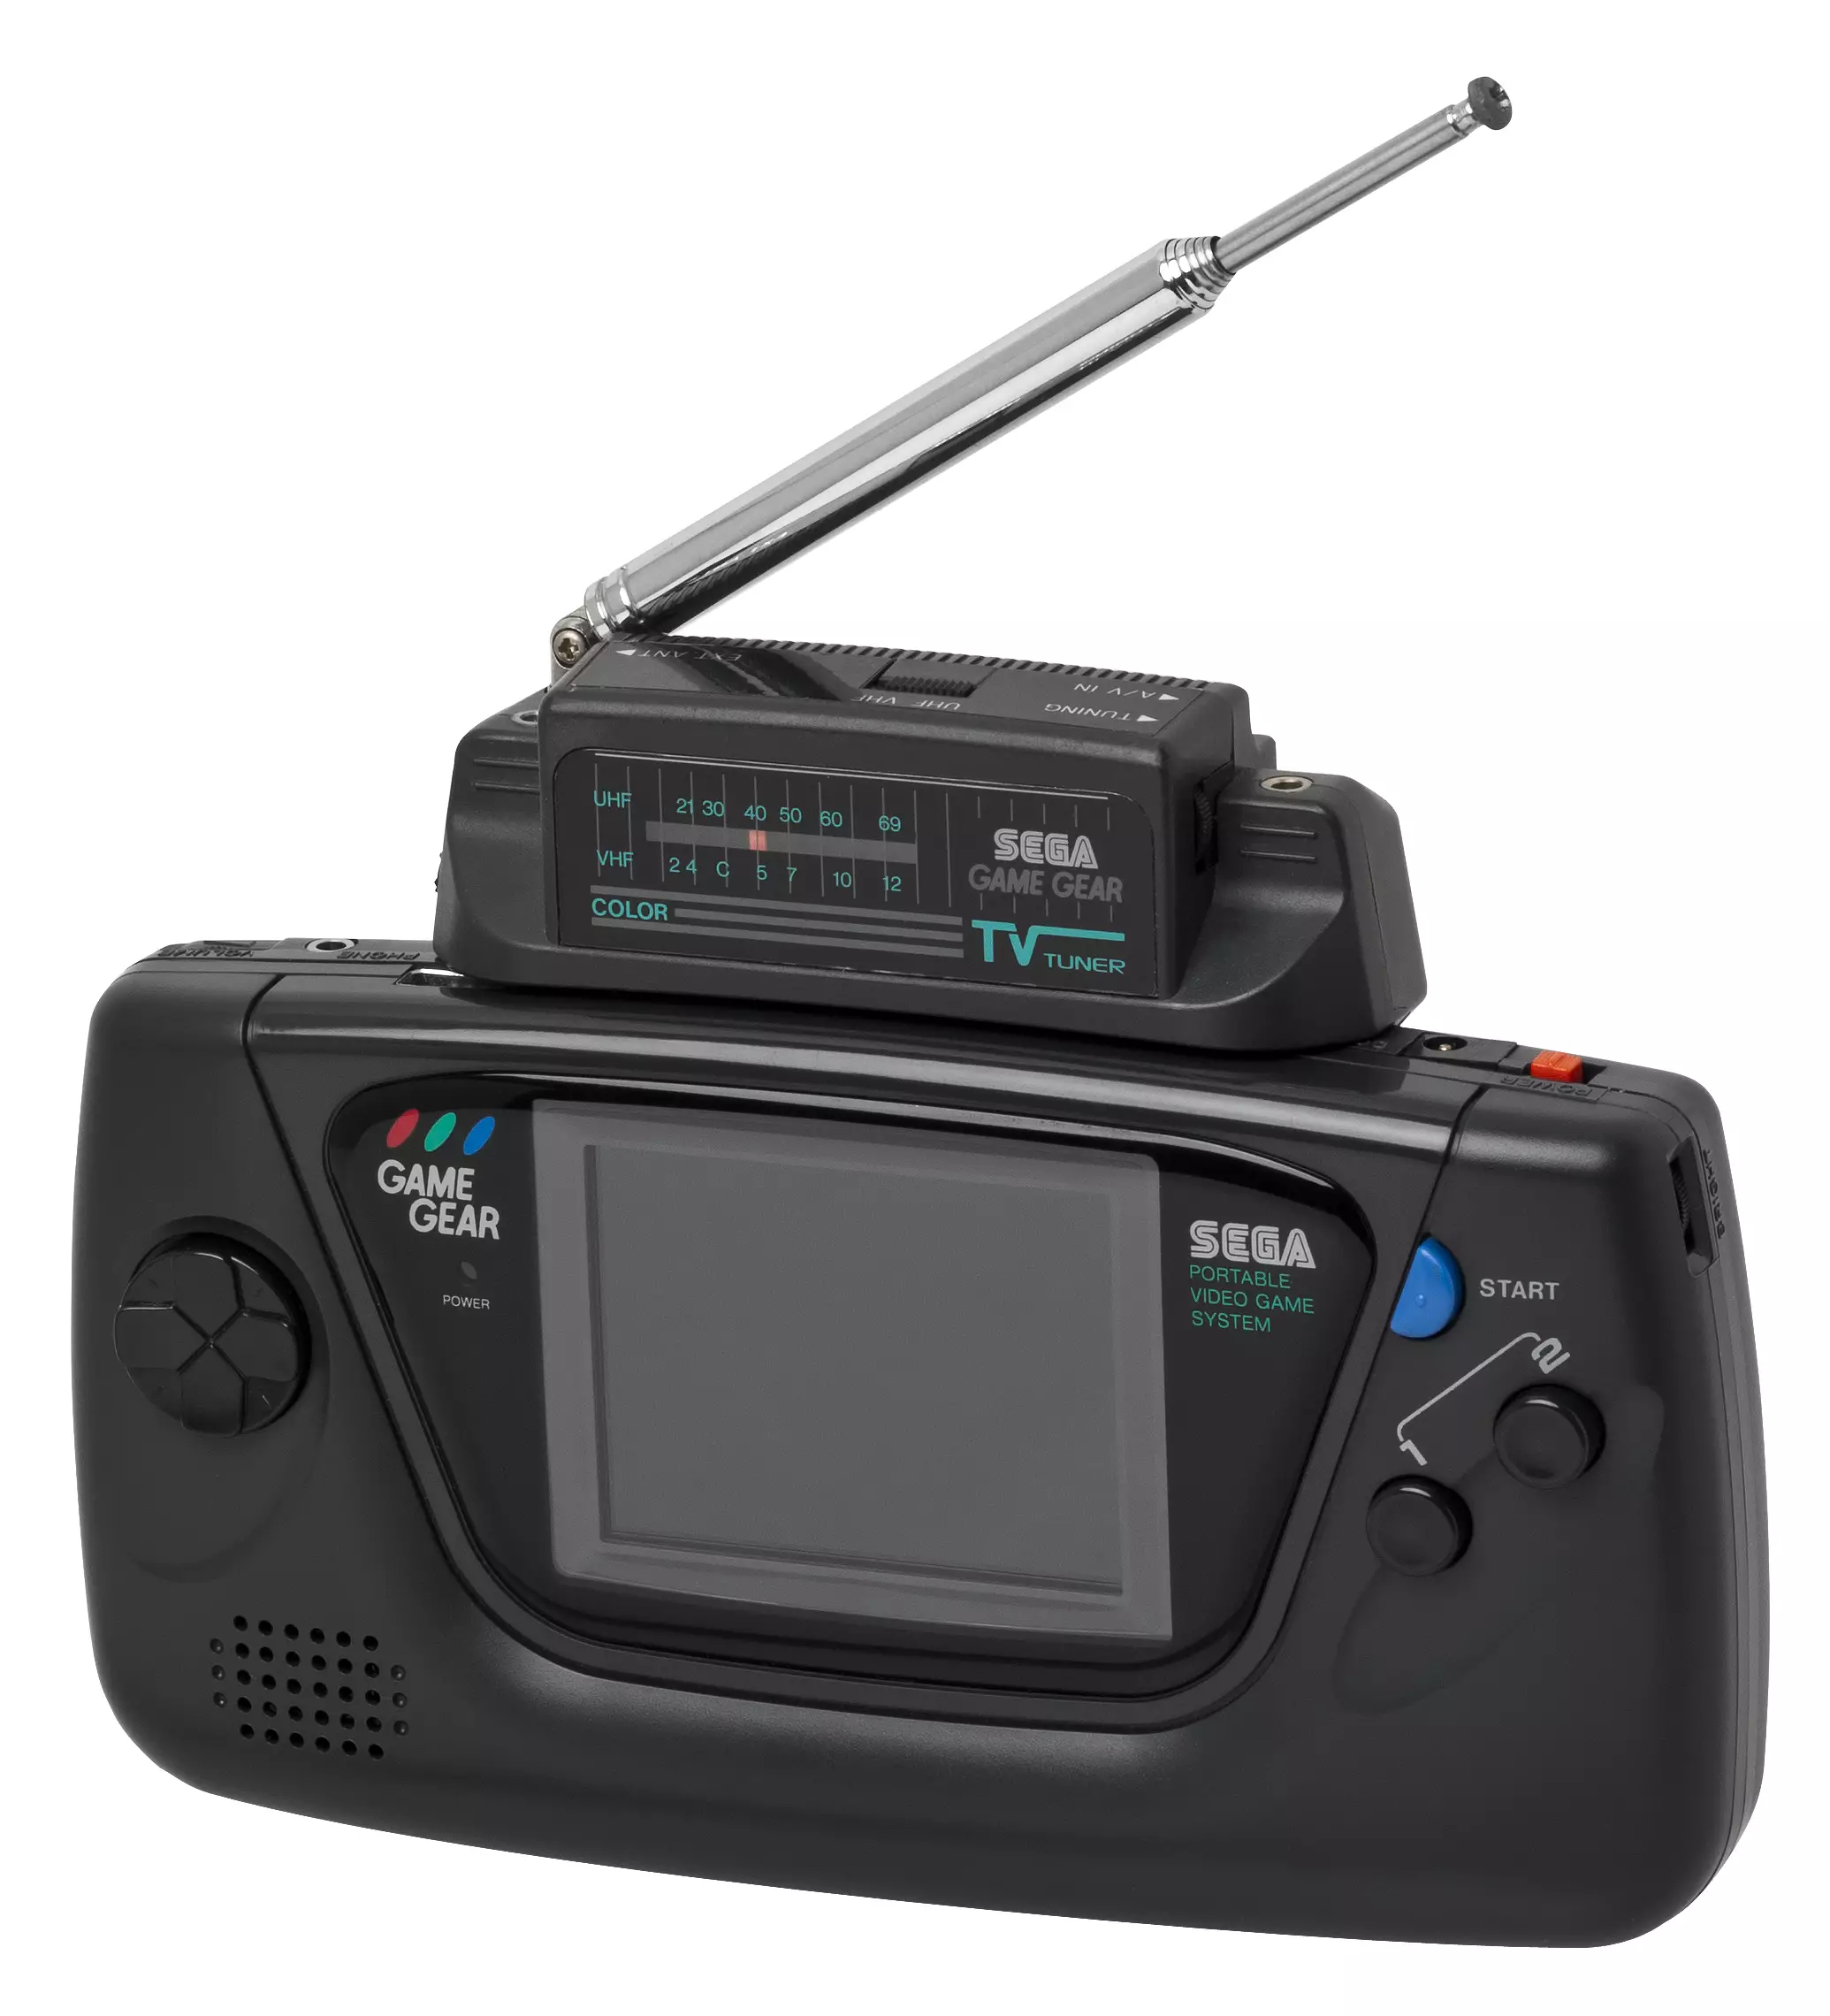 The SEGA Game Gear with TV Tuner inserted /